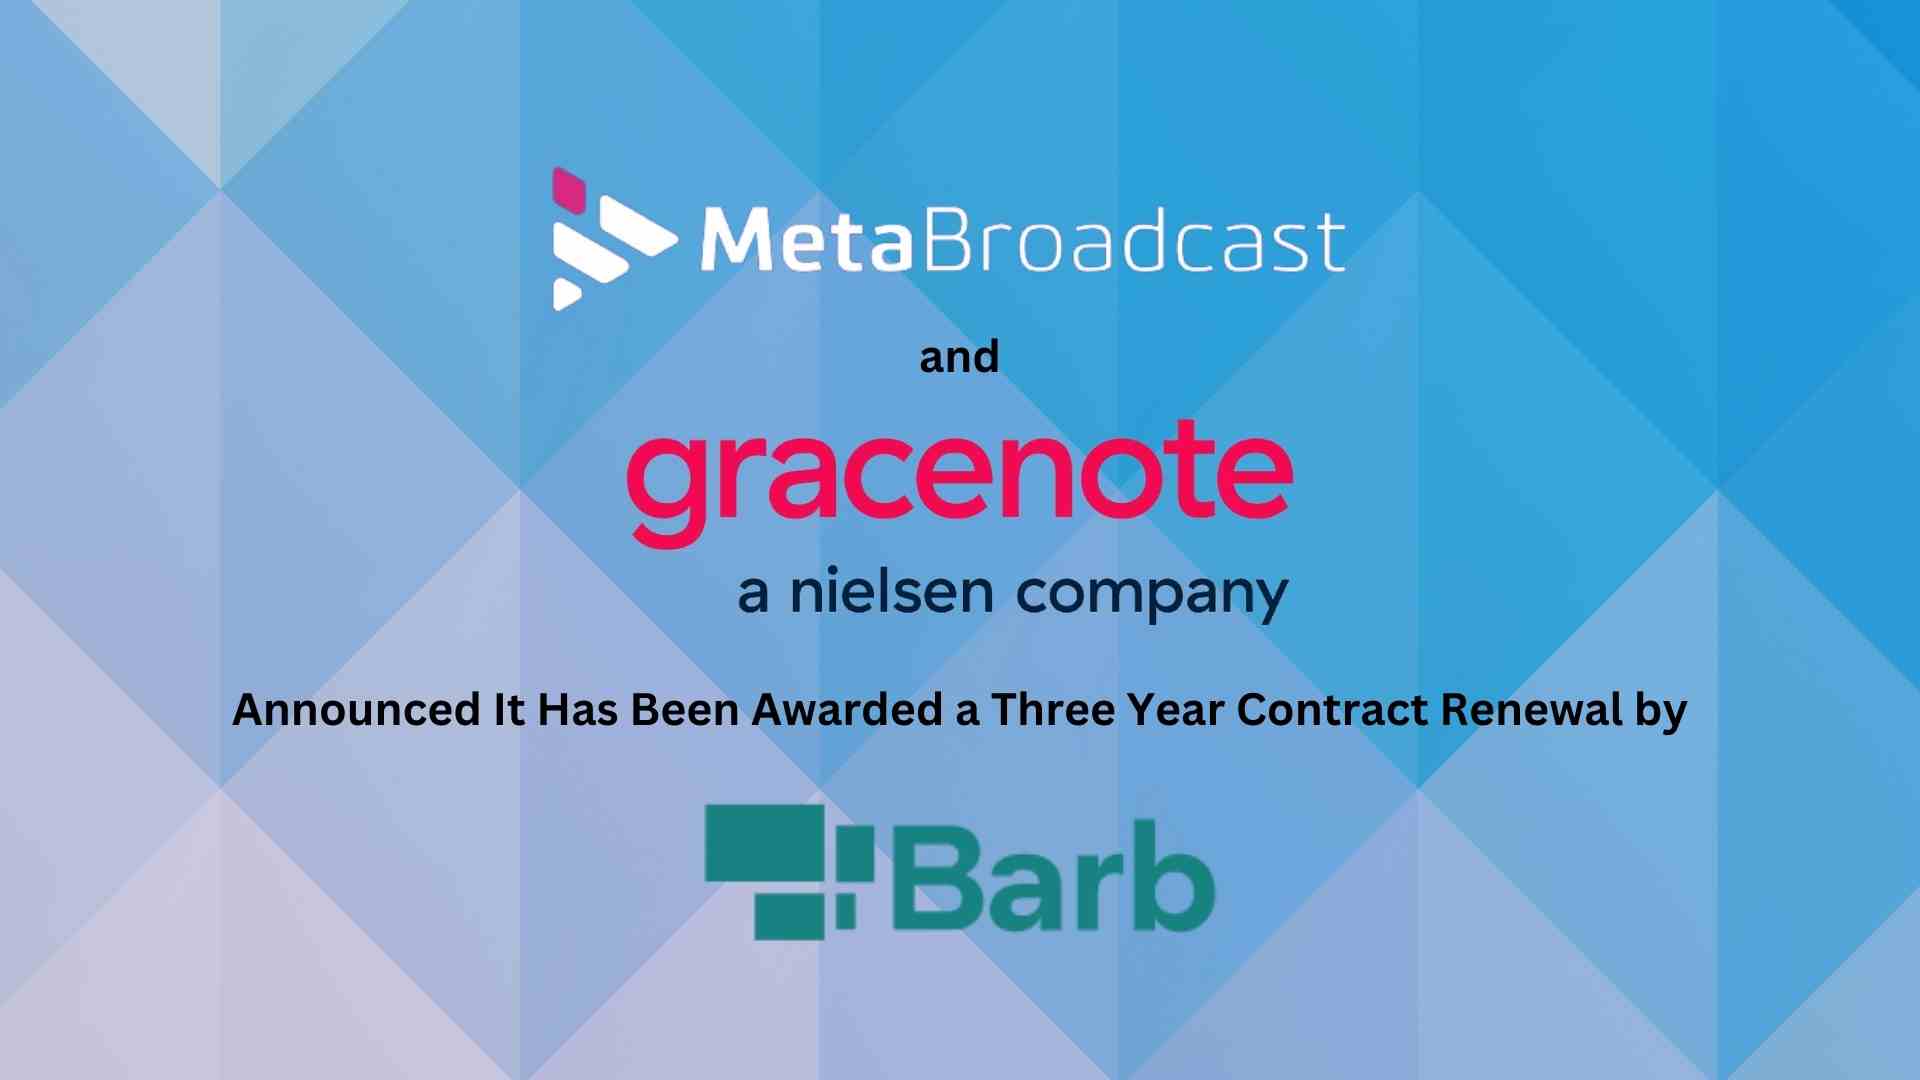 Barb Taps MetaBroadcast and Nielsen's Gracenote to Optimize TV Audience Measurement in UK